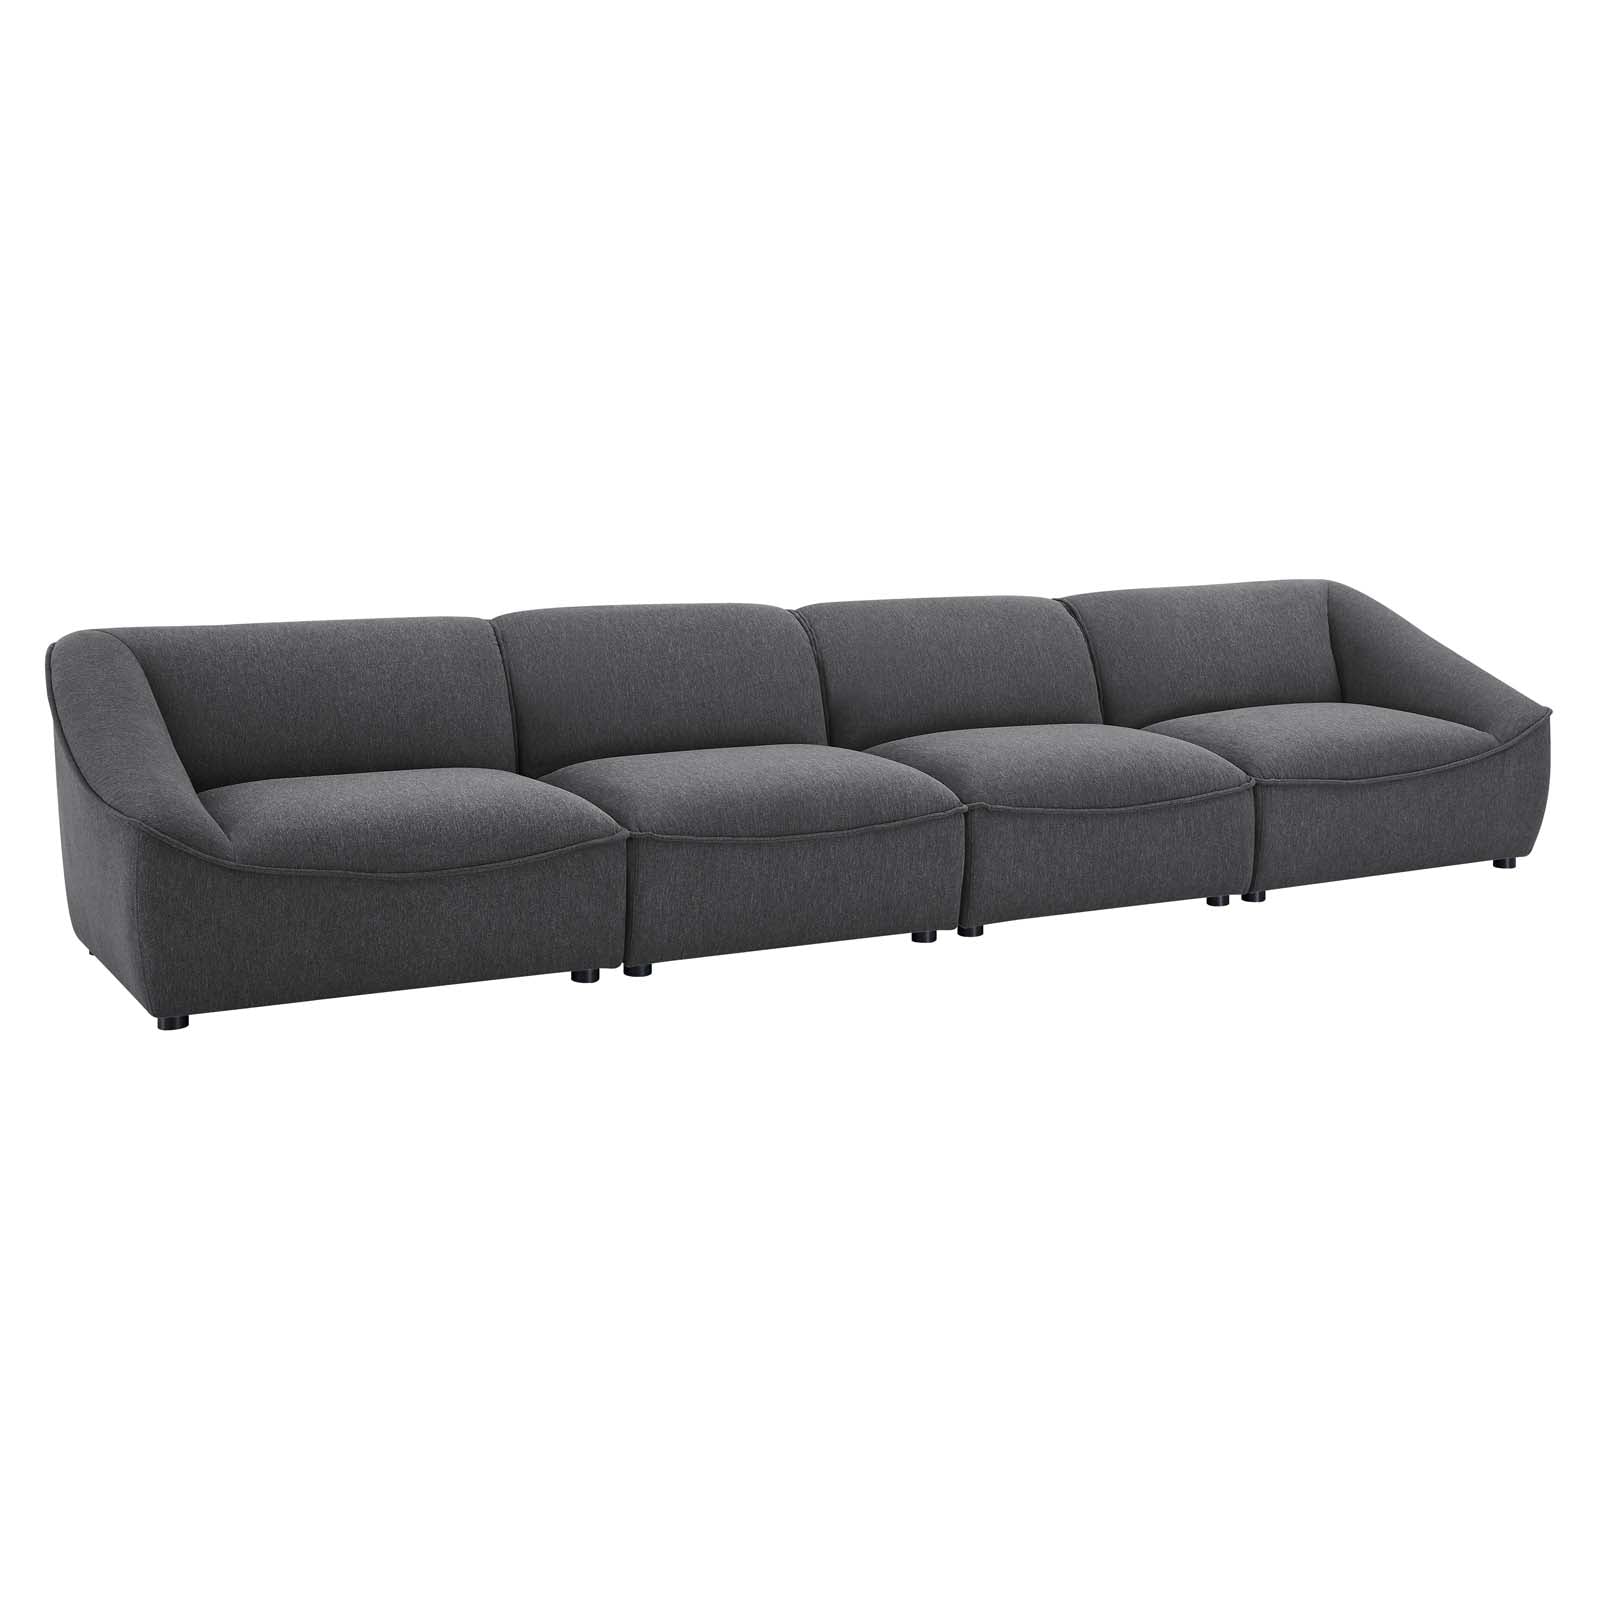 Modway Sofas & Couches - Comprise-4-Piece-Sofa-Charcoal